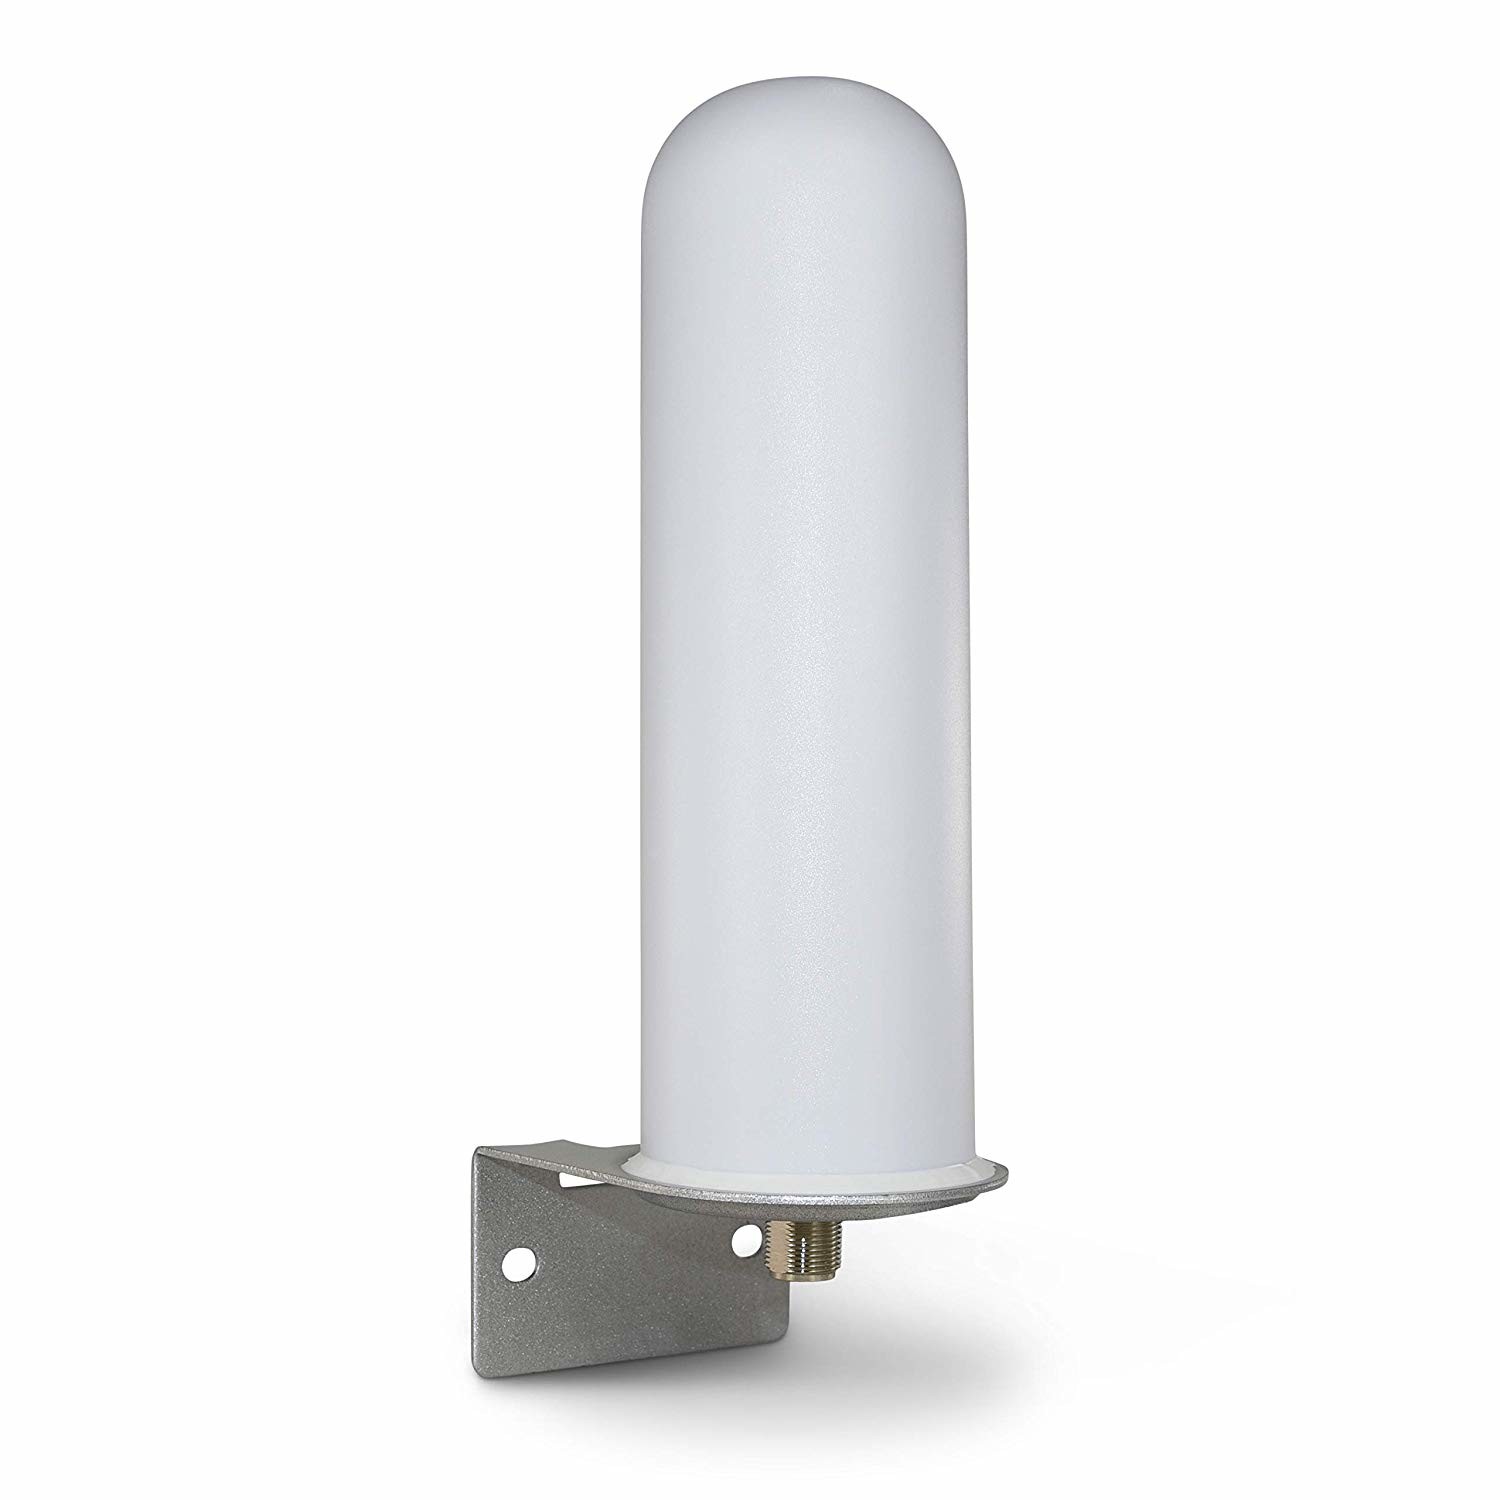  Outdoor ABS 698-3800MHz 12dBi 10W 5G Base Station Antenna Manufactures